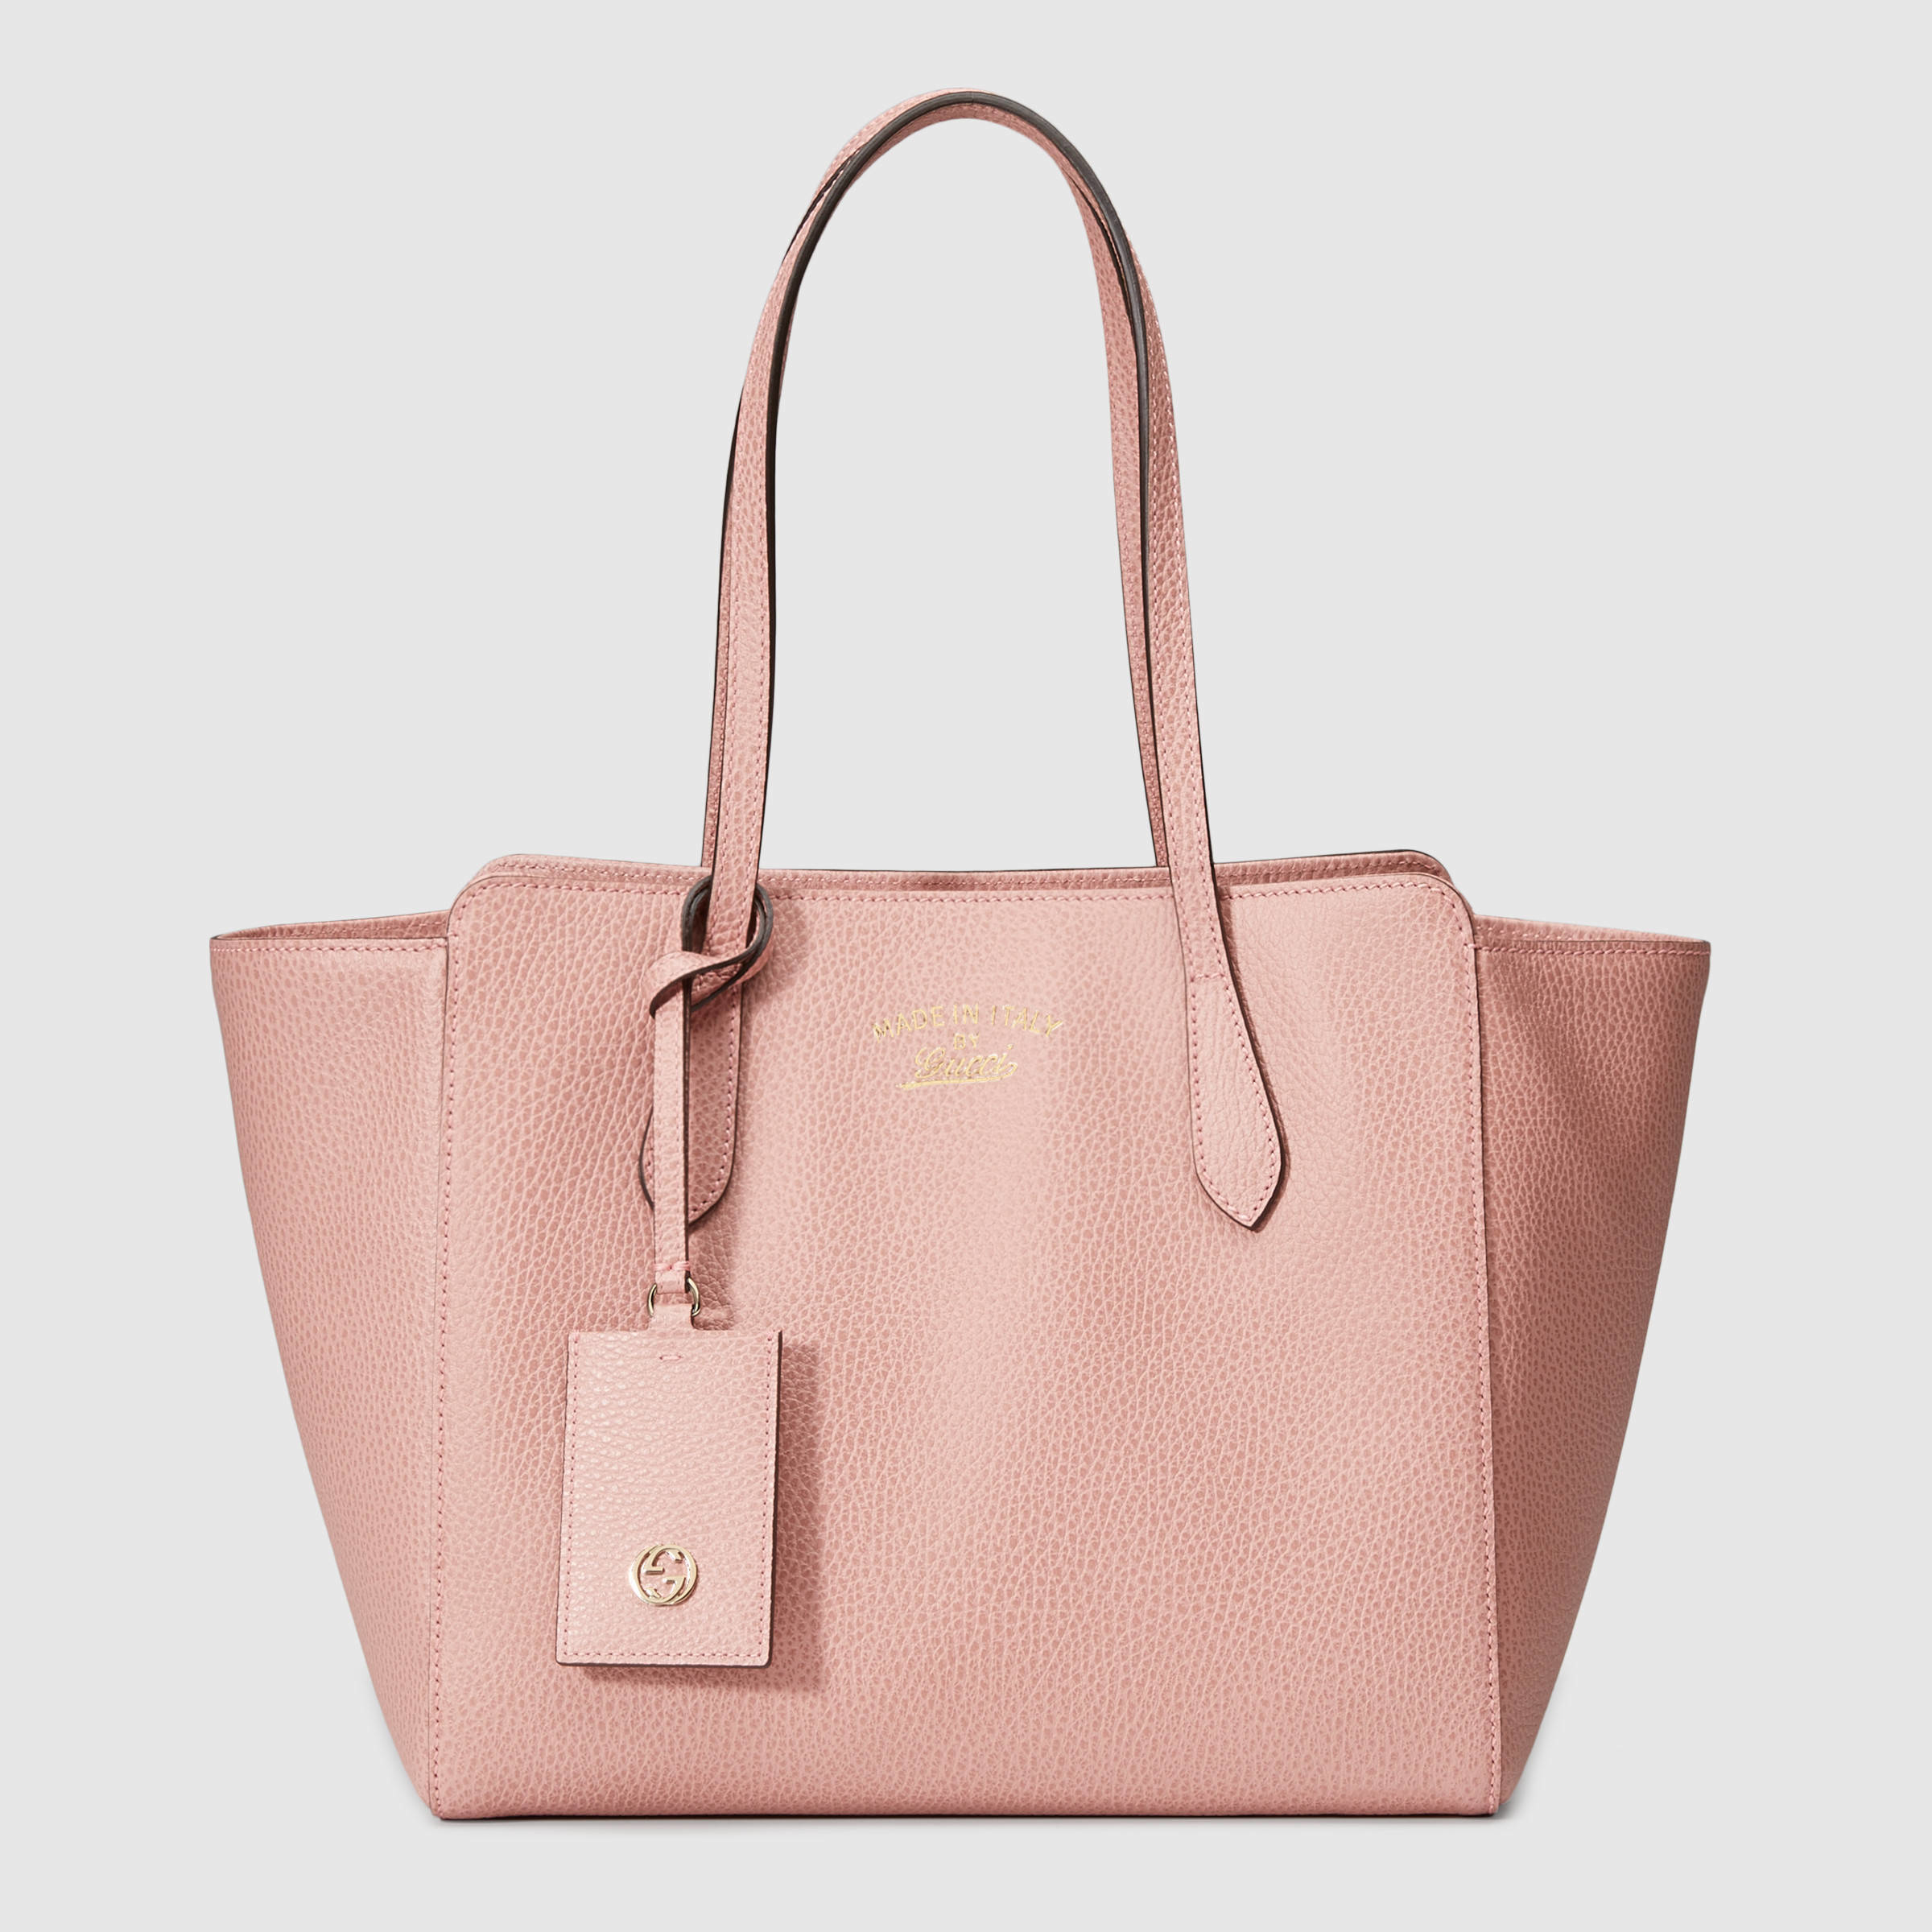 Gucci Swing Small Leather Tote in Blue (soft pink leather) | Lyst